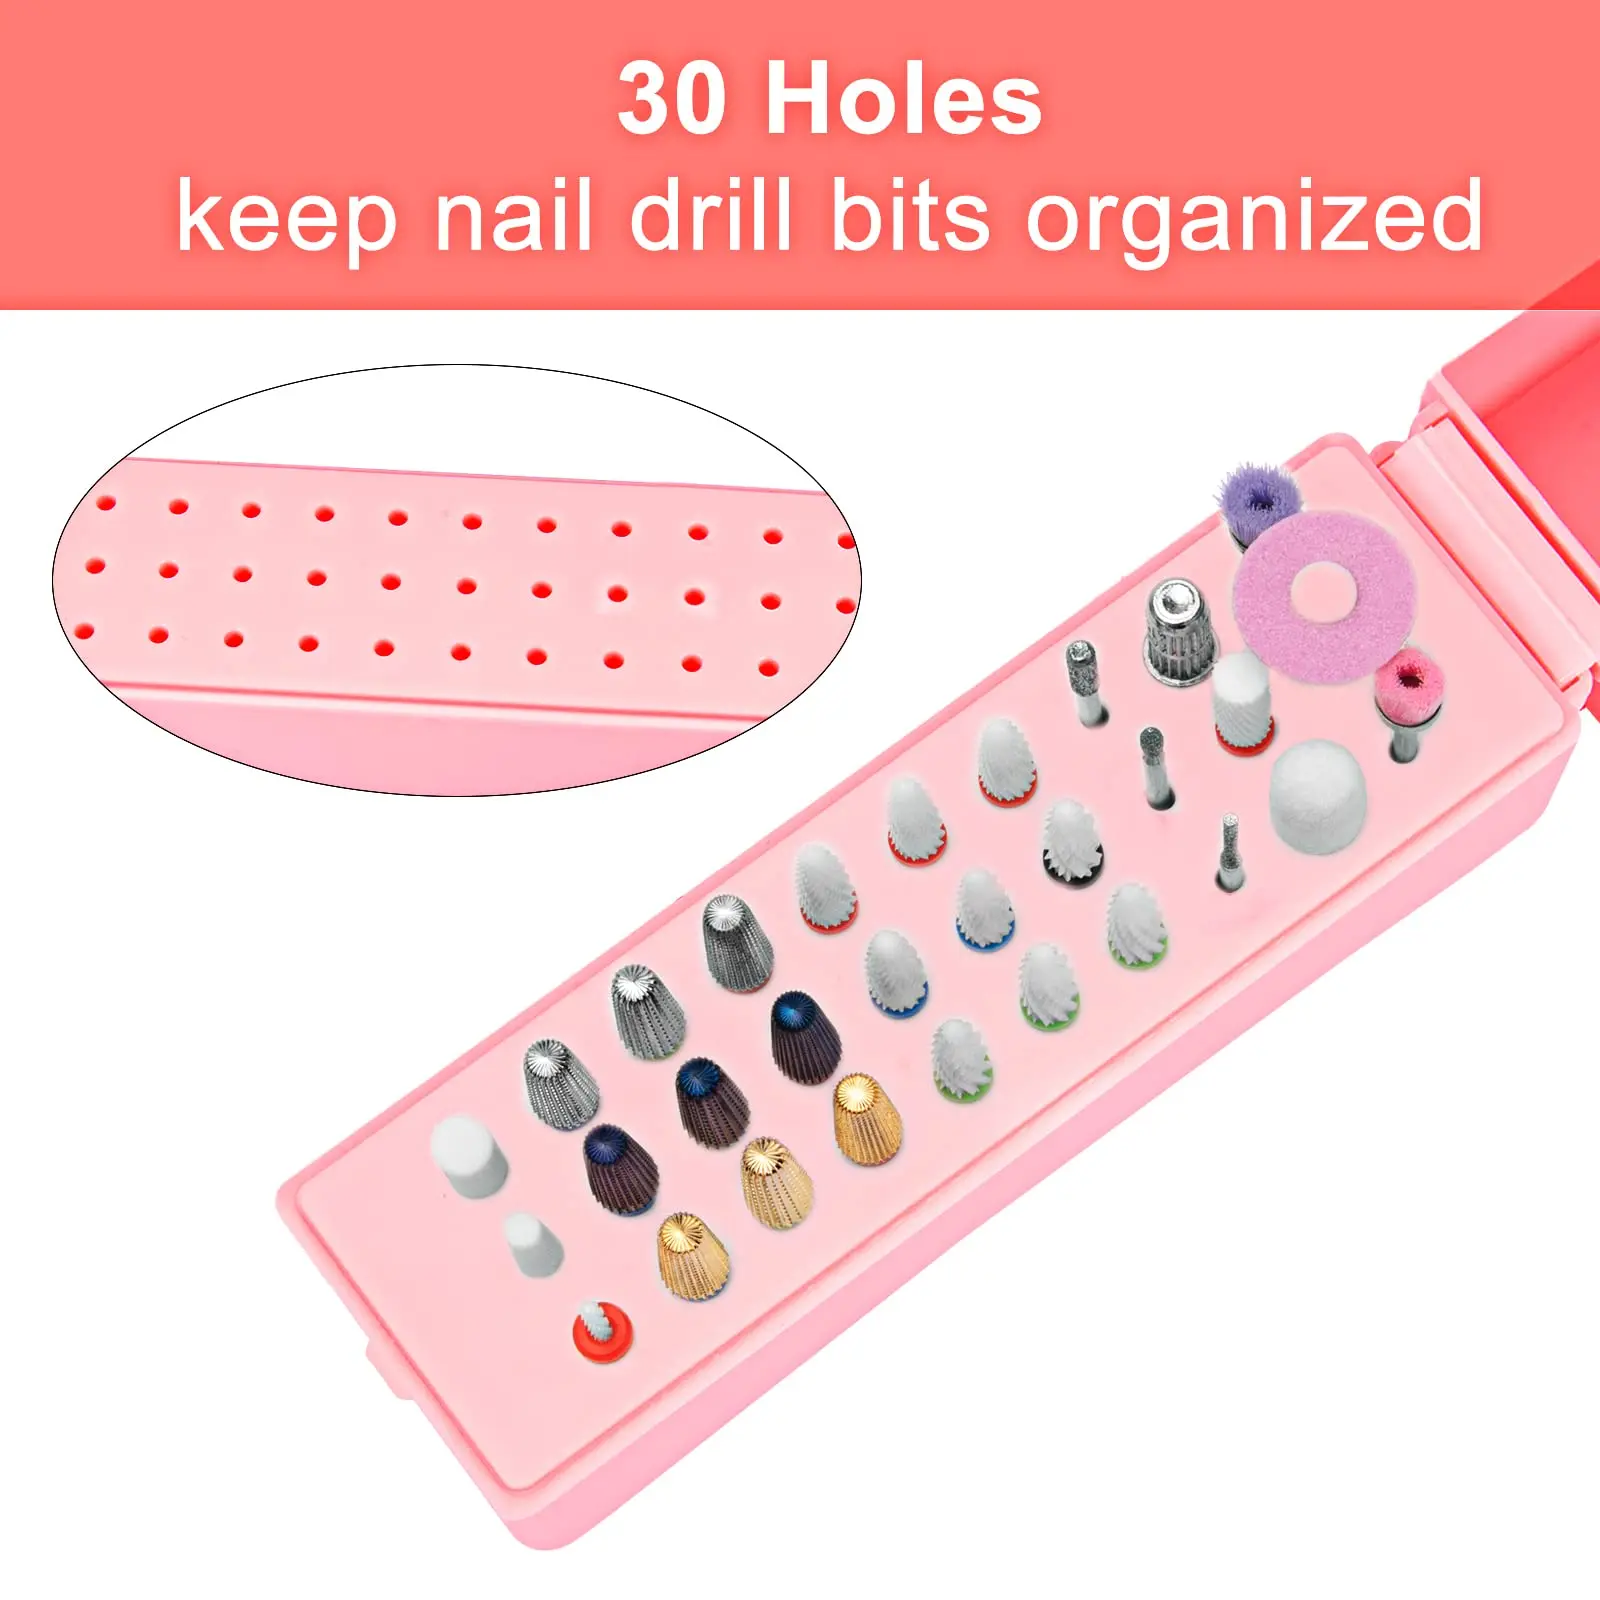 Dustproof Nail Drill Bits Holder 30 Holes PINK Milling Cutter Organizer Manicure Drill Bit Nails Stand Displayer Container images - 6